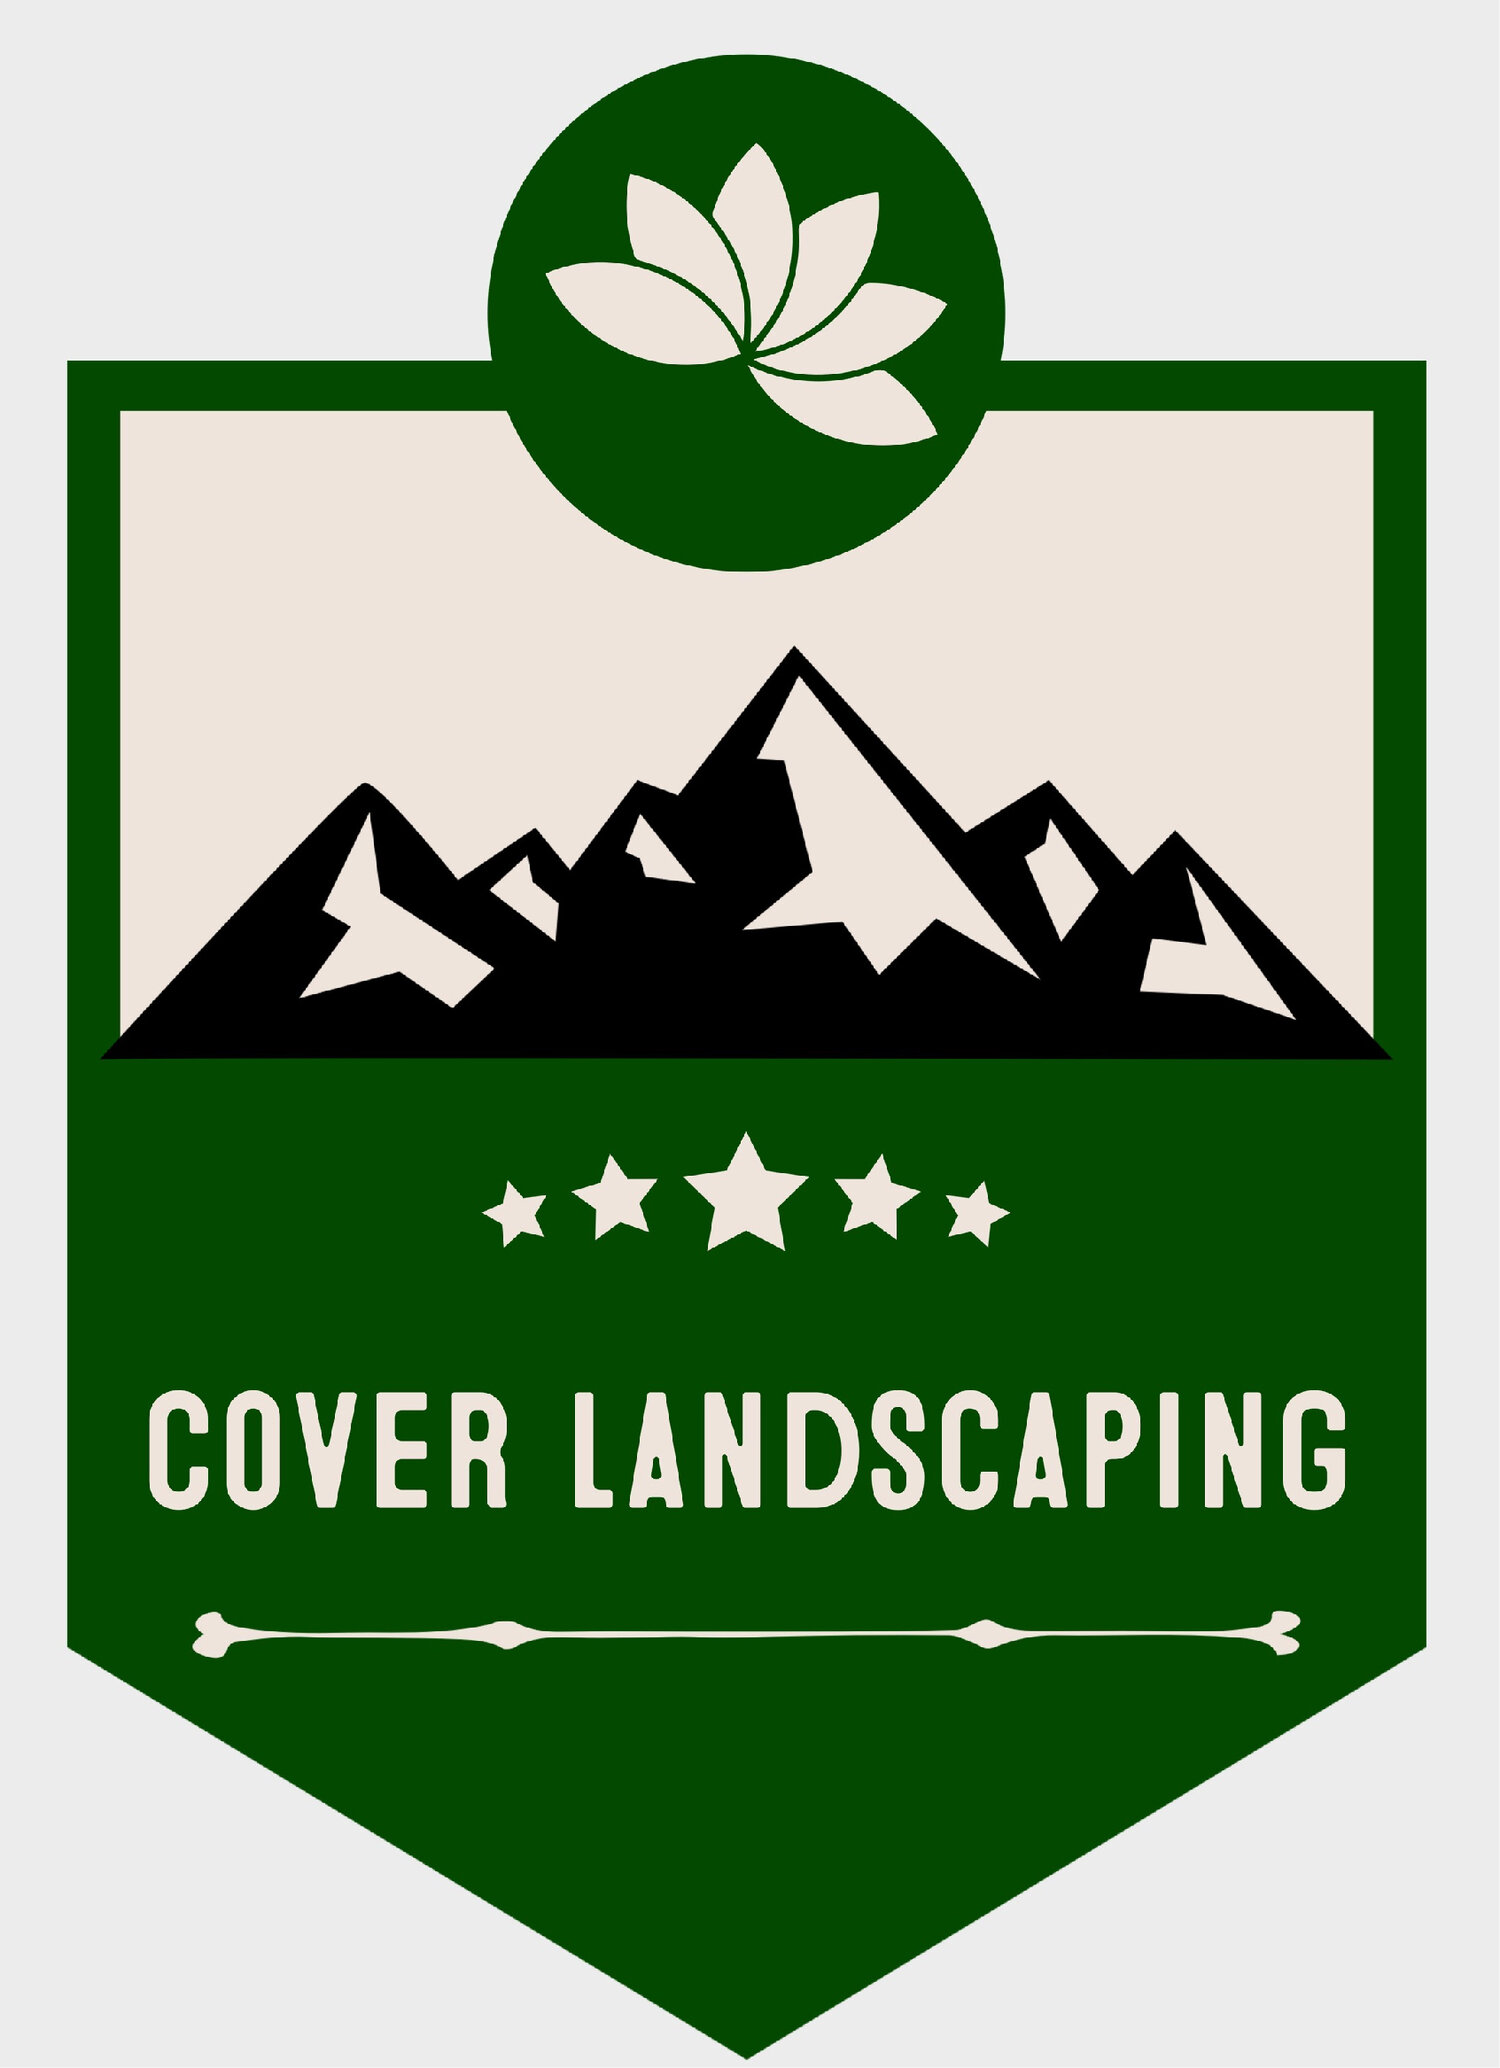 COVER LANDSCAPING